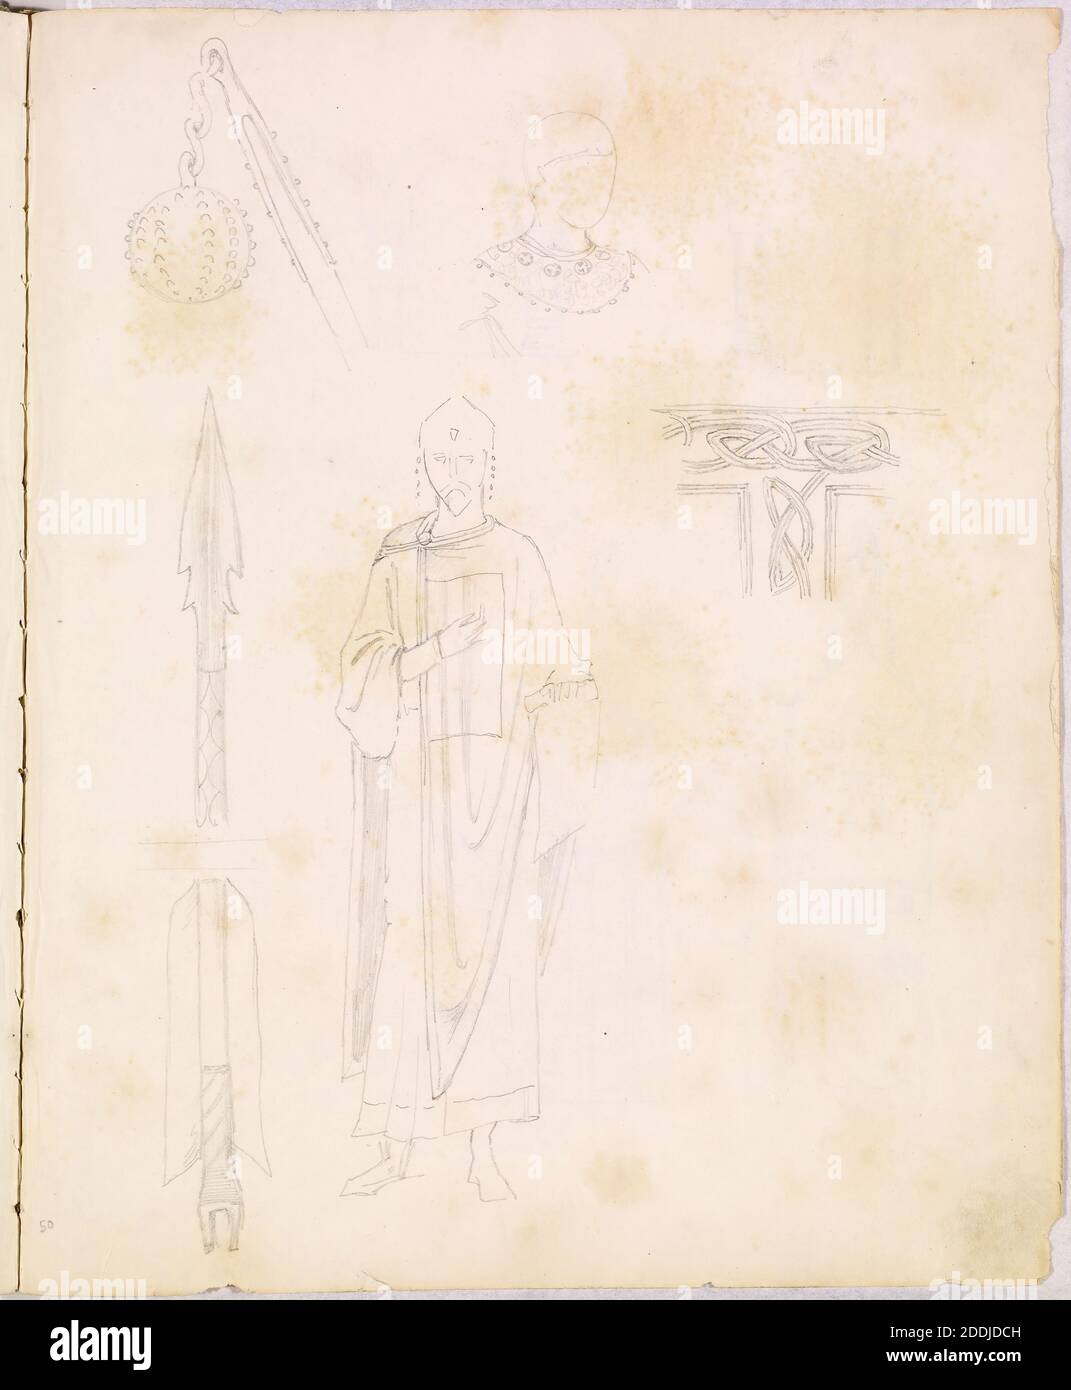 Sketchbook of Byzantine and Romanesque Decoration, 1887-1894 Studies of weaponry and costume Sir Edward Burne-Jones, 110 sketches of Mediaeval and Byzantine decoration made in connection with studies for the 'Holy Grail' tapestries for Morris & Co., Art Movement, Pre-Raphaelite, Pencil, Sketch, Illustration, Study Stock Photo